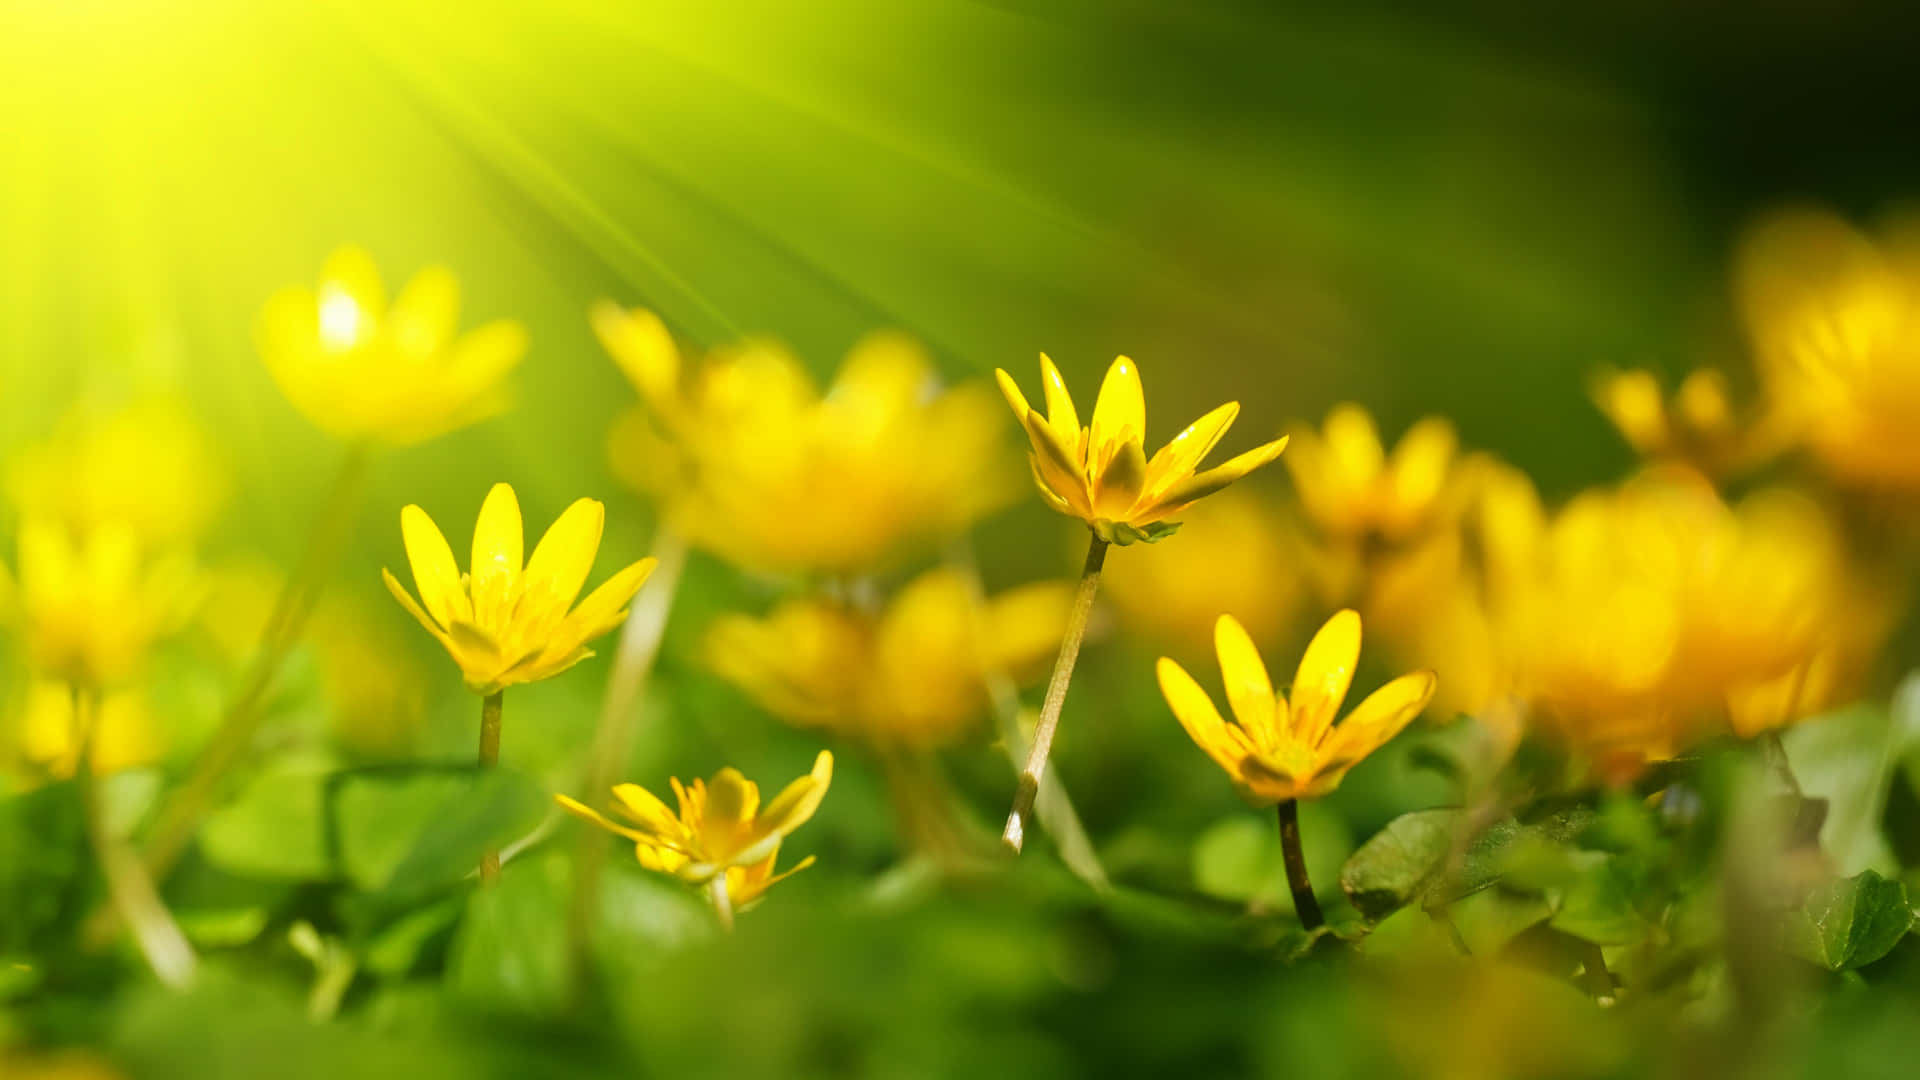 A vibrant green and yellow background